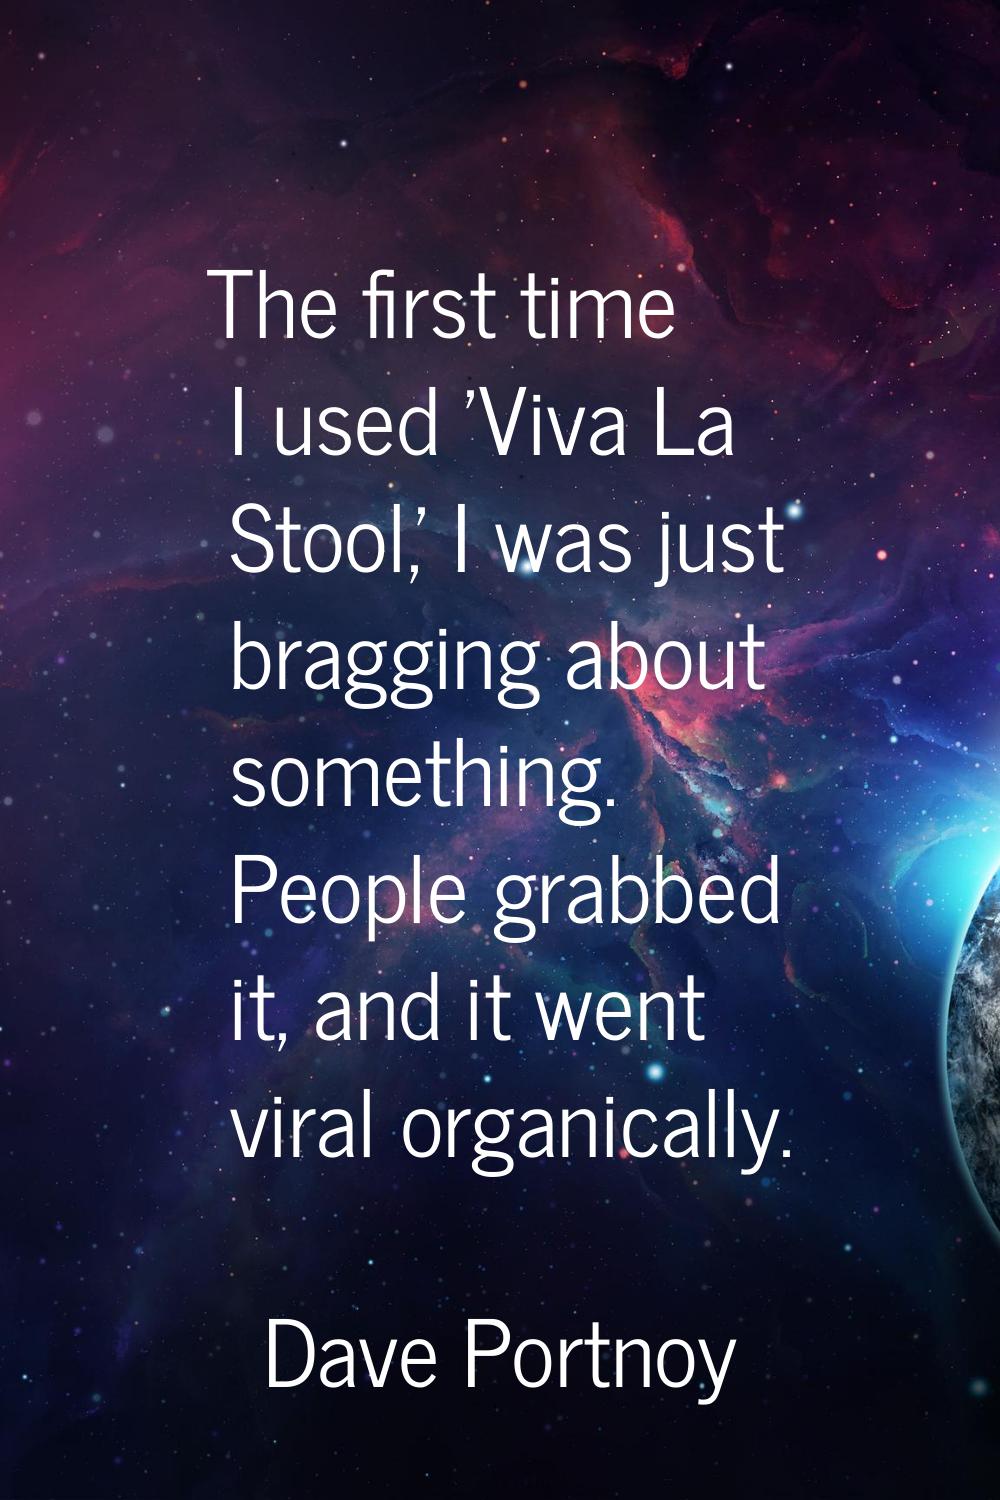 The first time I used 'Viva La Stool,' I was just bragging about something. People grabbed it, and 